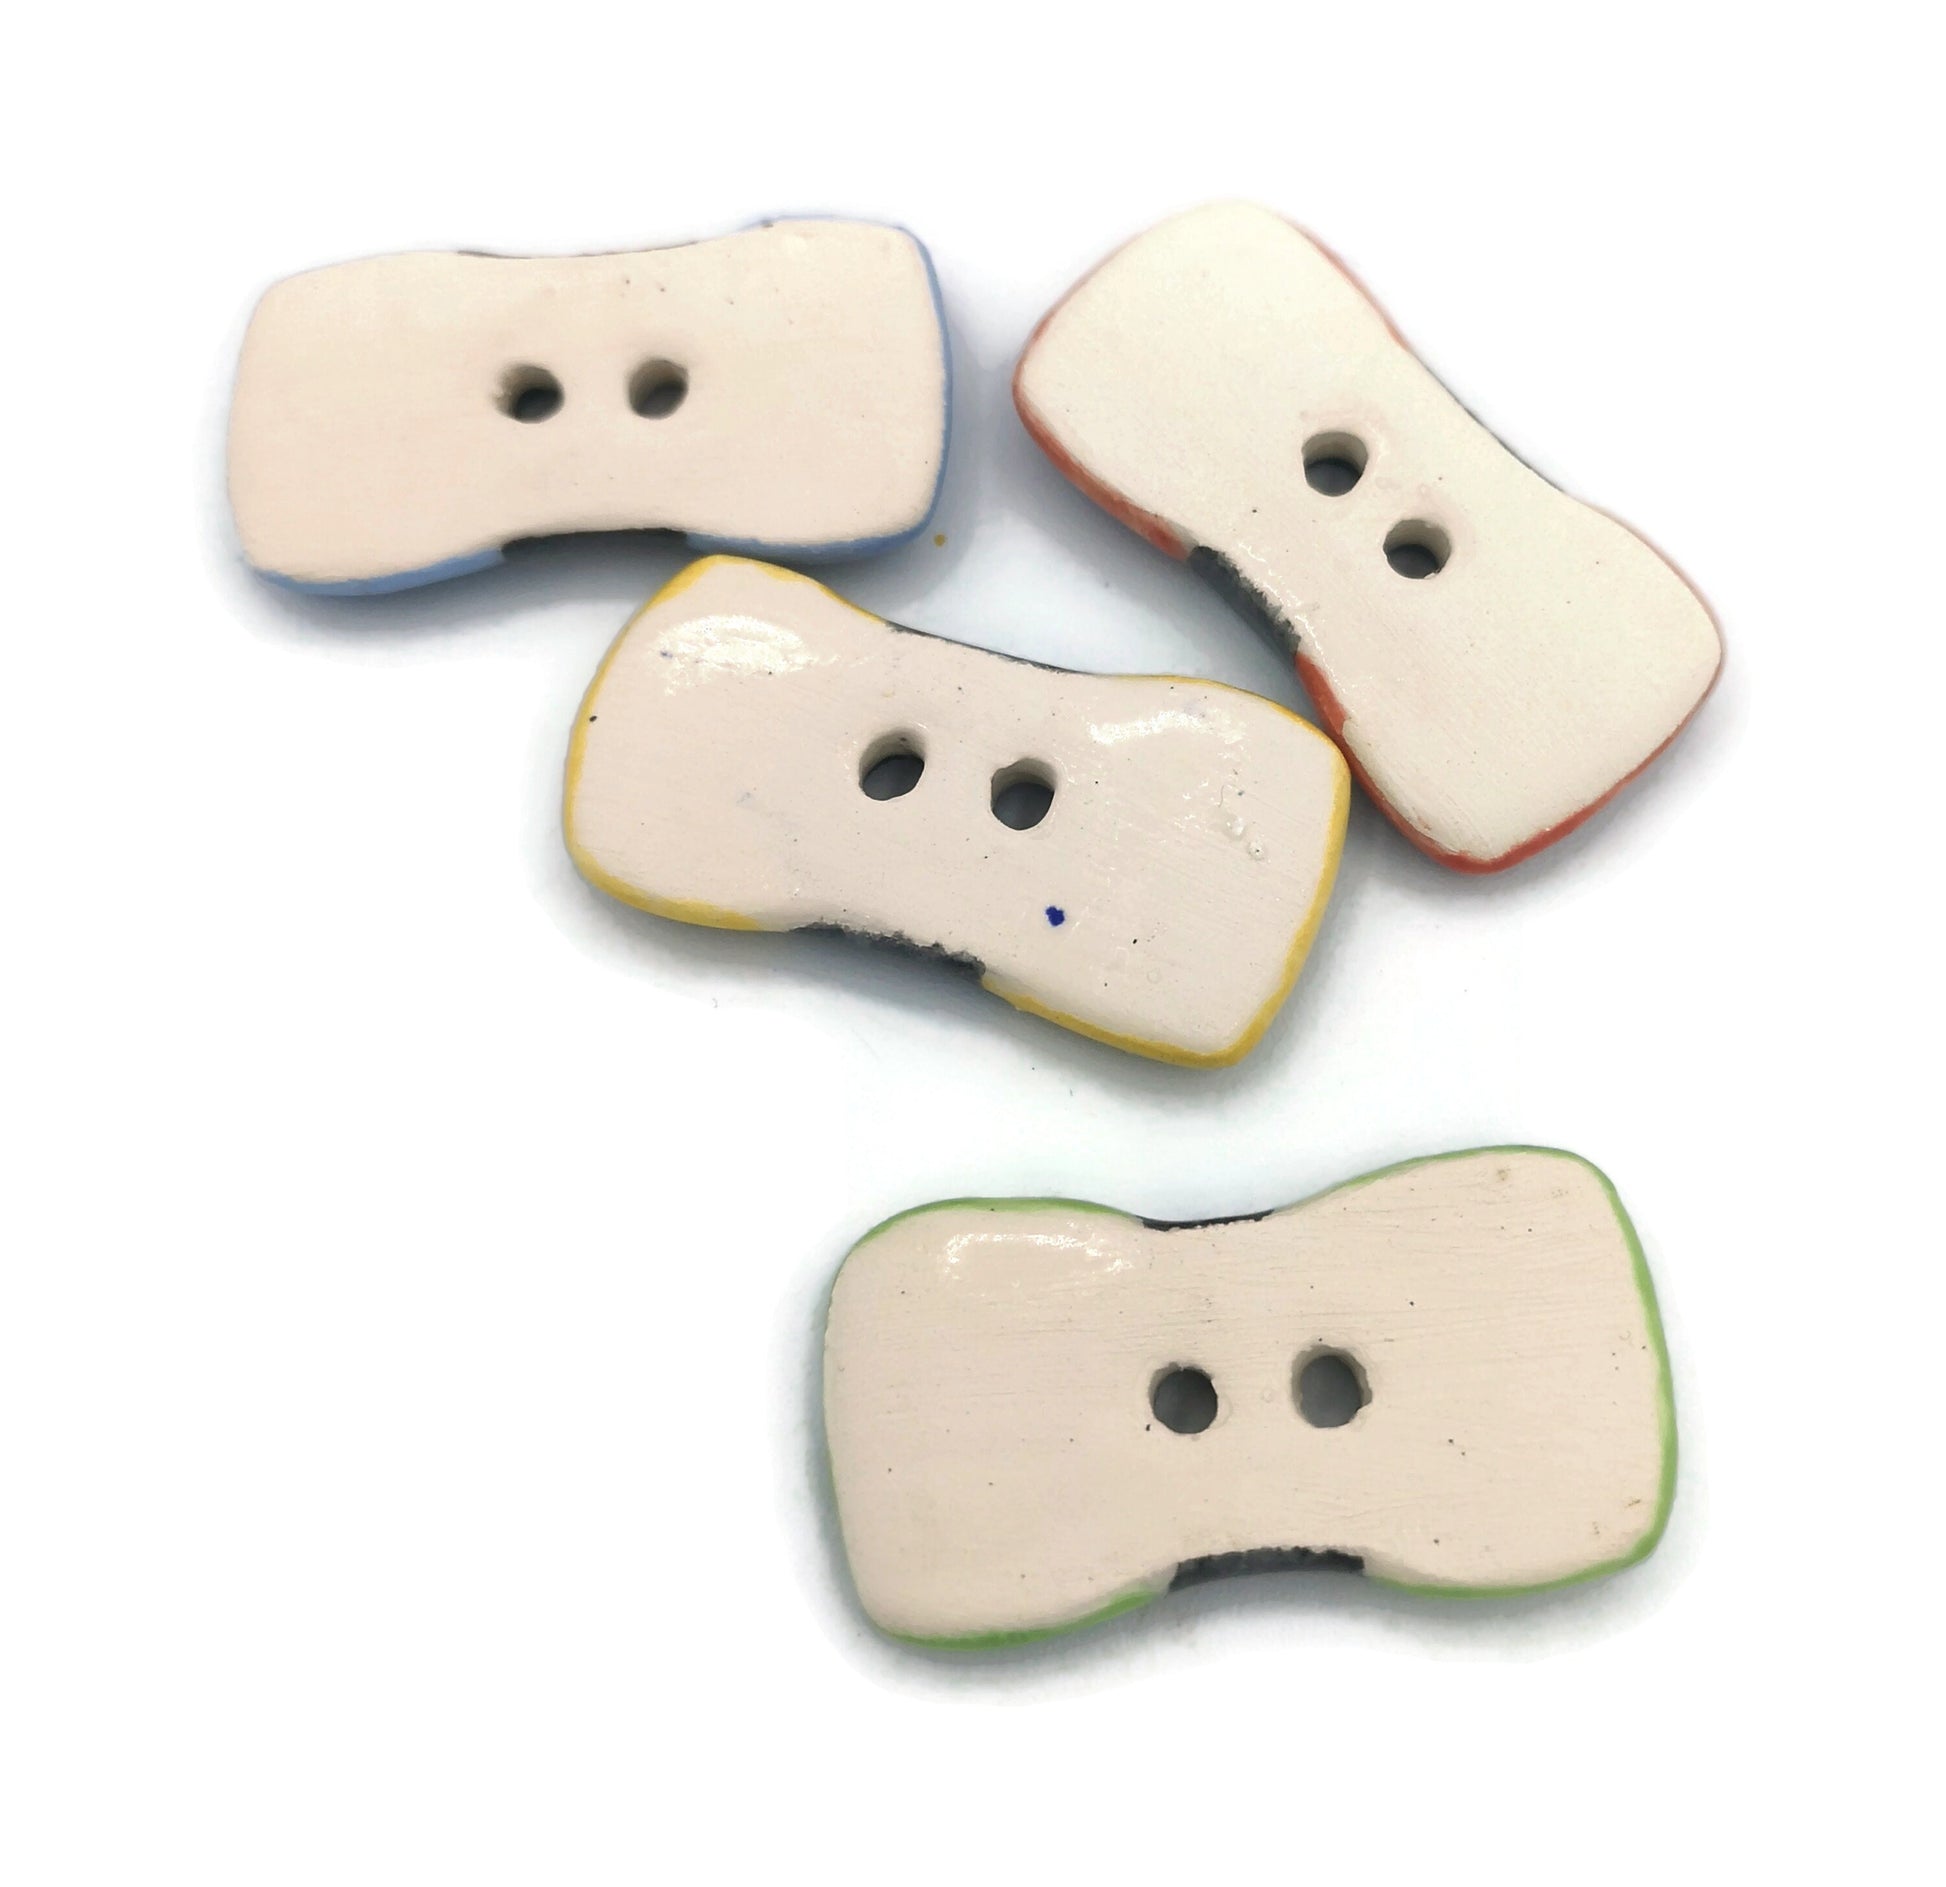 Set of 4 Handmade Ceramic Novelty Theme Buttons For Jewelry Making, Bow Charms, Large Fancy Buttons For Jacket, Sewing Suppies And Notions - Ceramica Ana Rafael